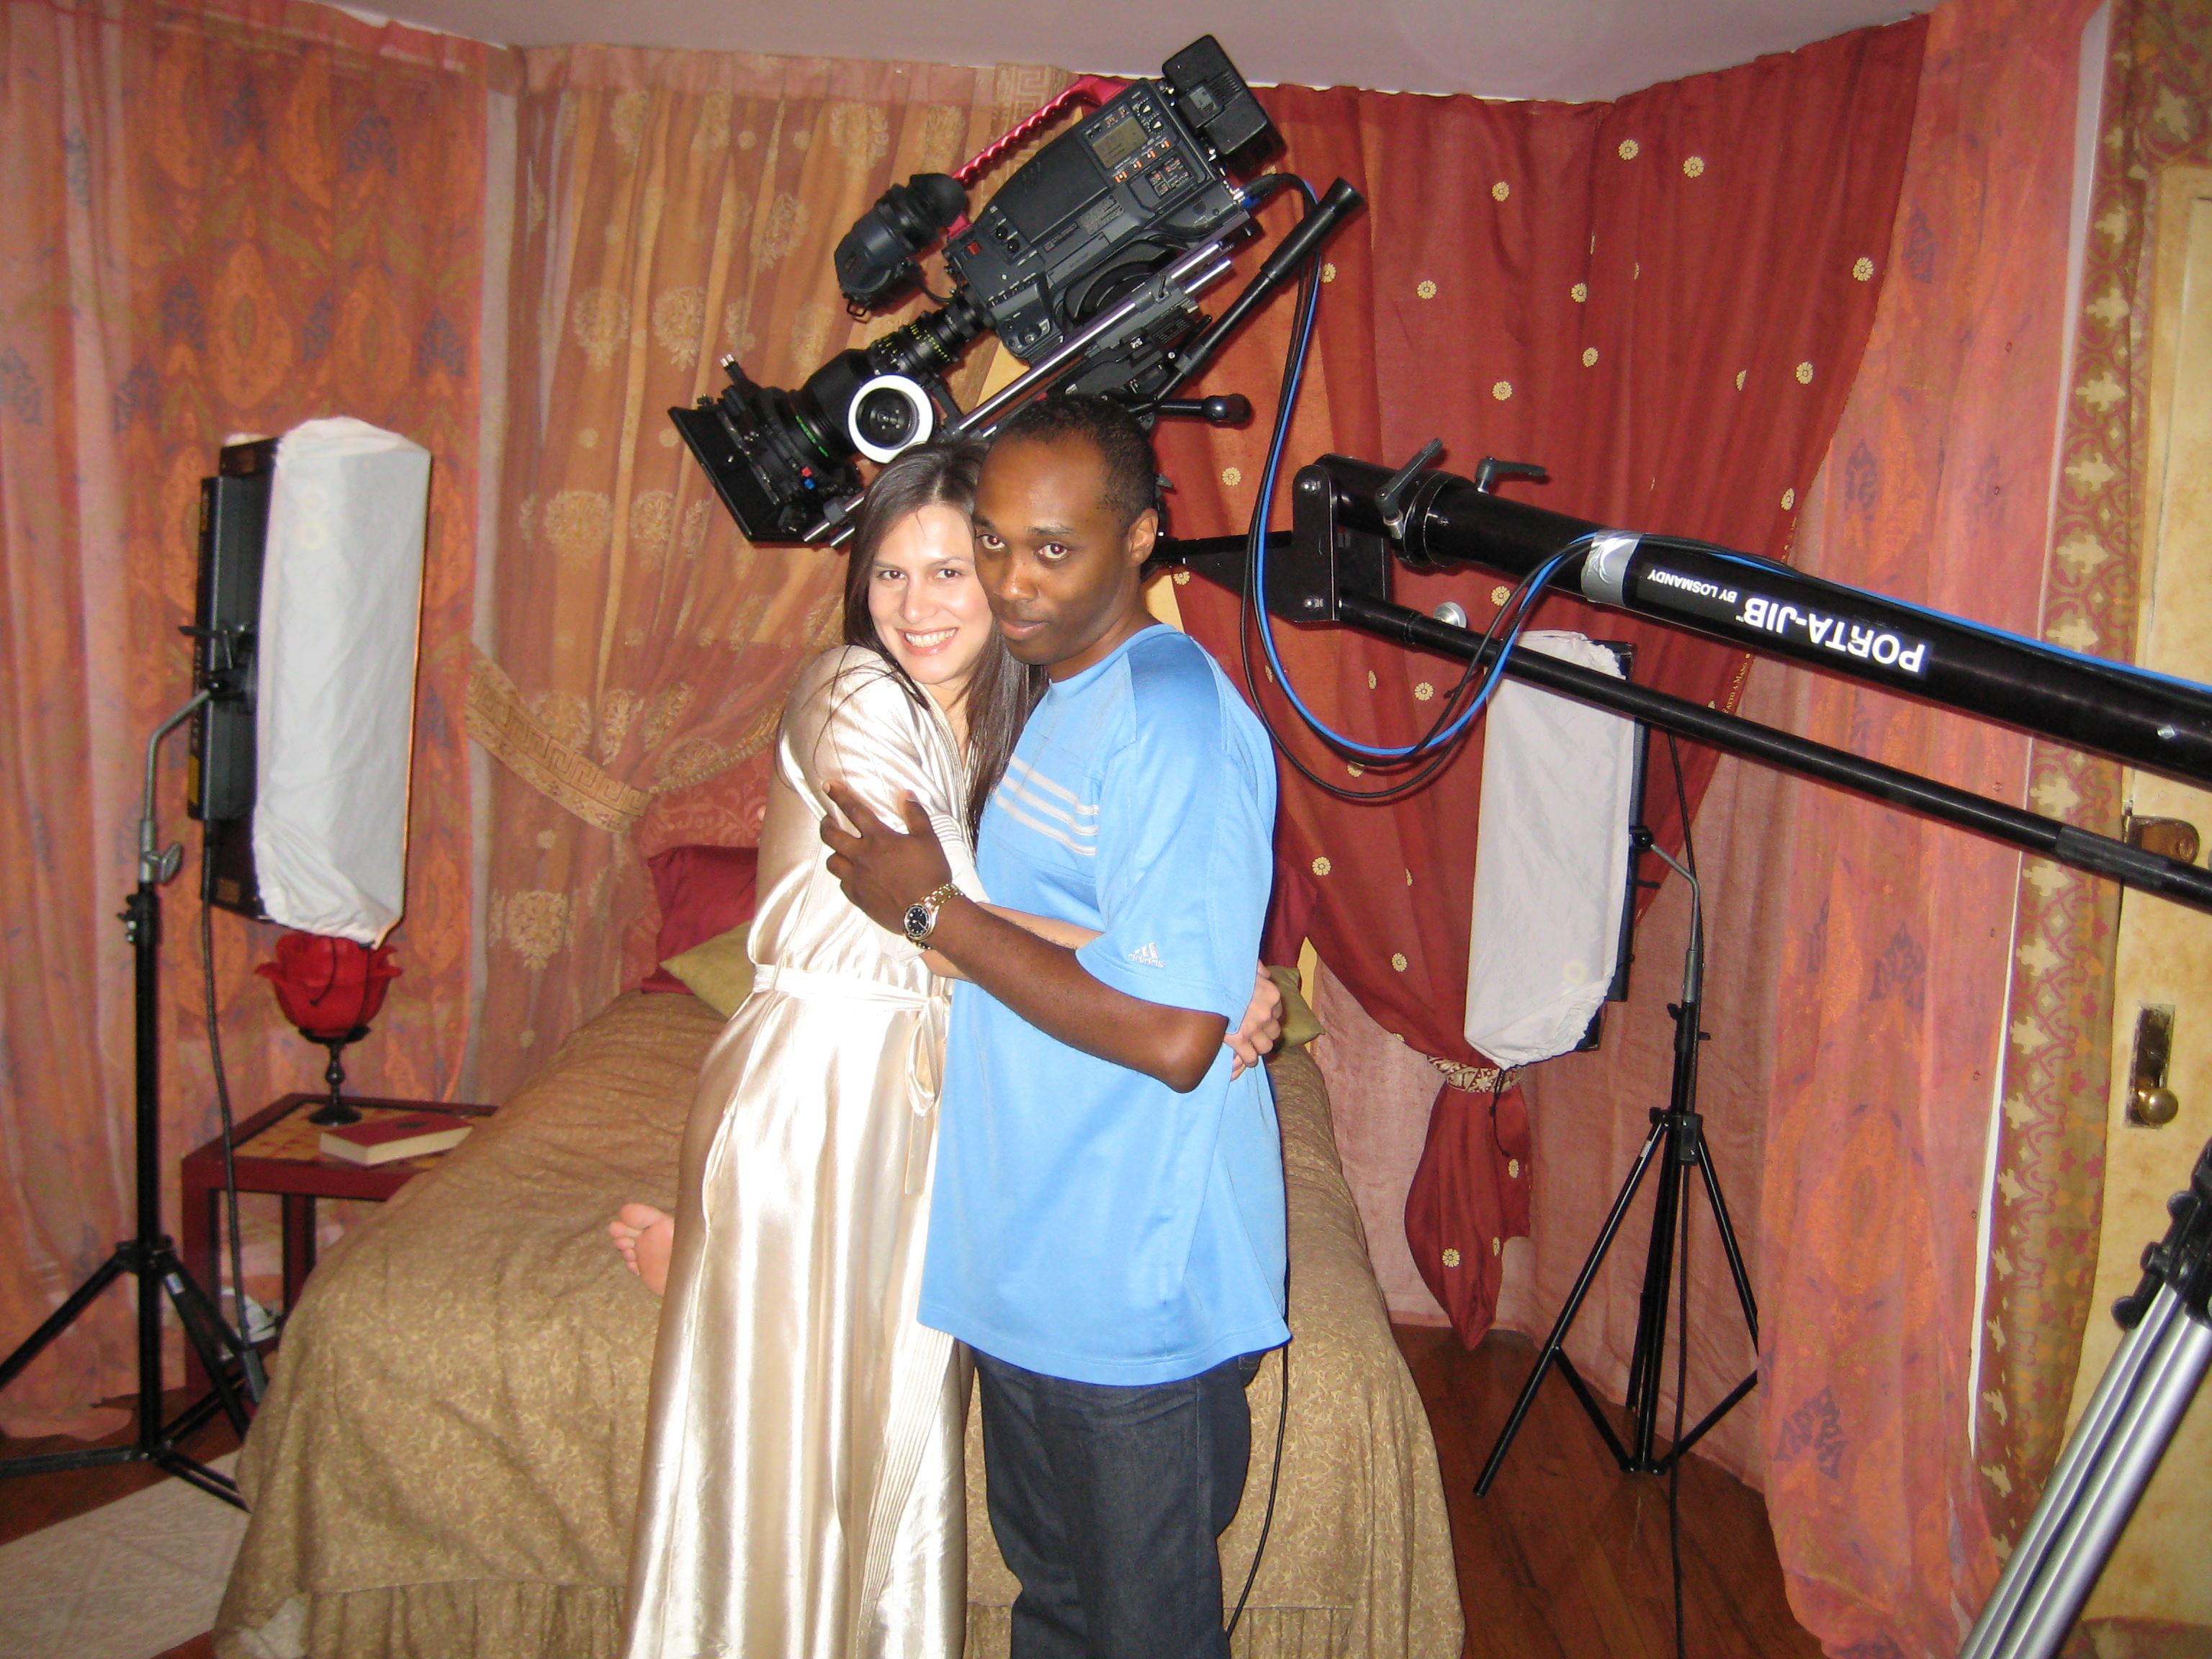 On the set of EVOL. Left: Actress/Musician Alisa Burket. Right: Director of Photography Abdul Stone Jackson